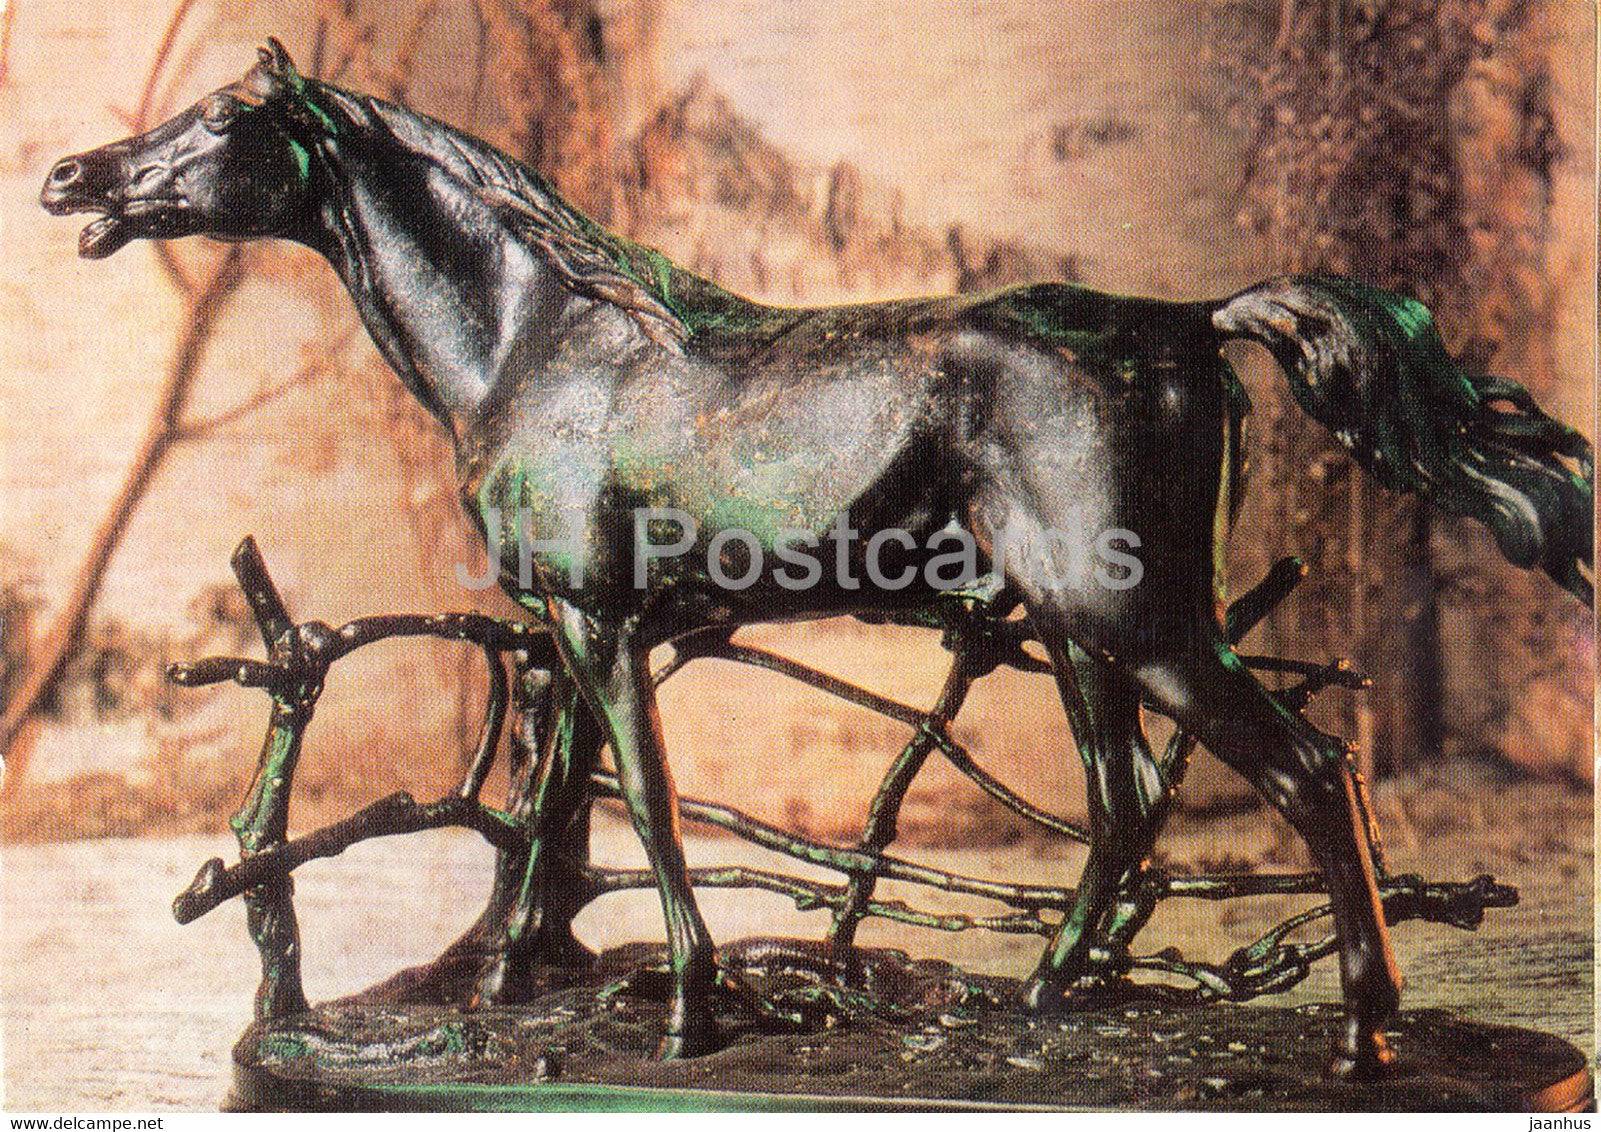 A Horse - cast iron - Products of the Kasli Masters - 1976 - Russia USSR - unused - JH Postcards